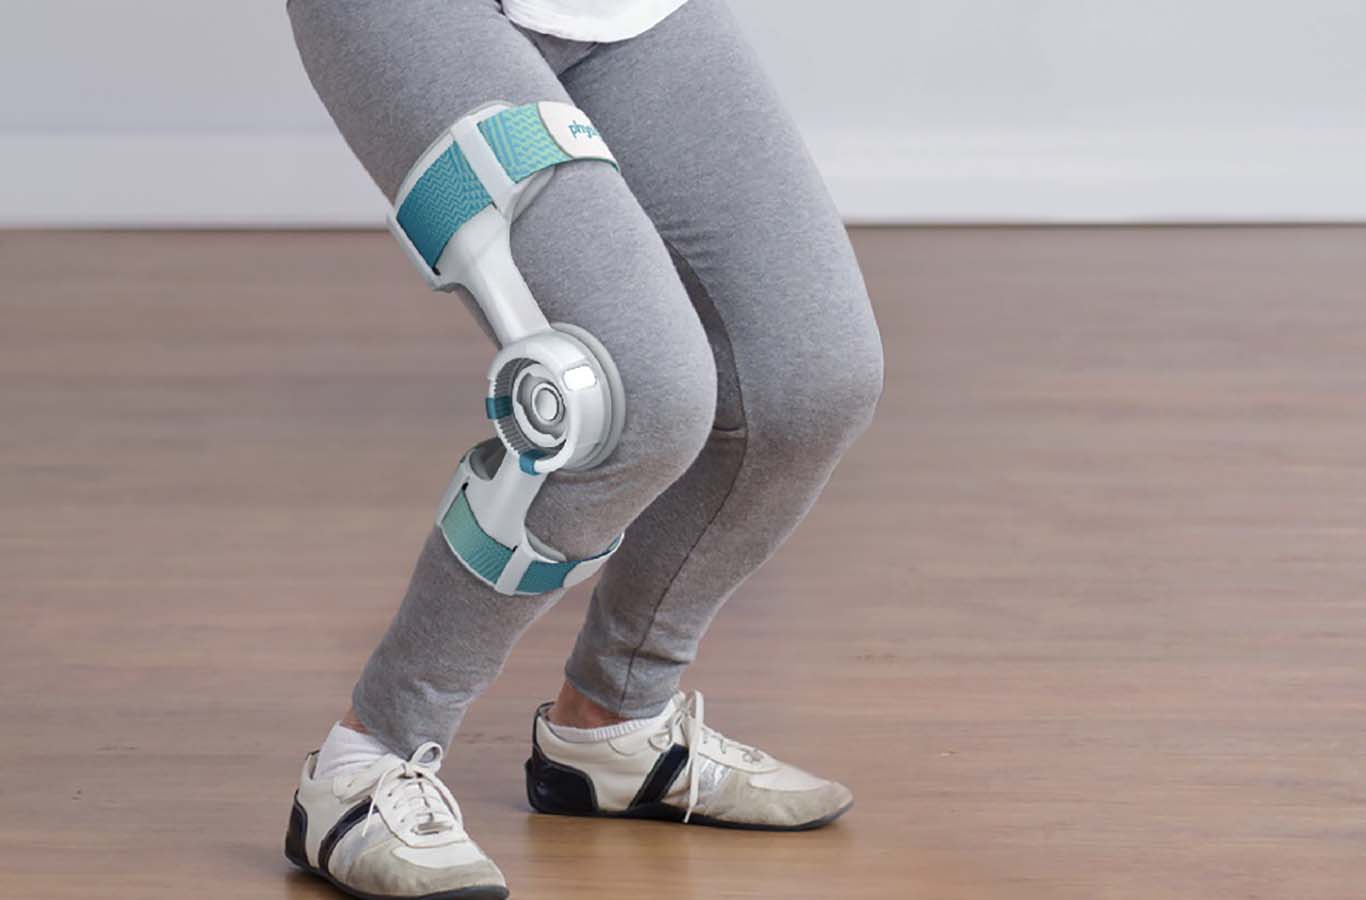 a pair of legs in grey tights and sneakers in a mini-squat, teal and grey brace worn on the right knee